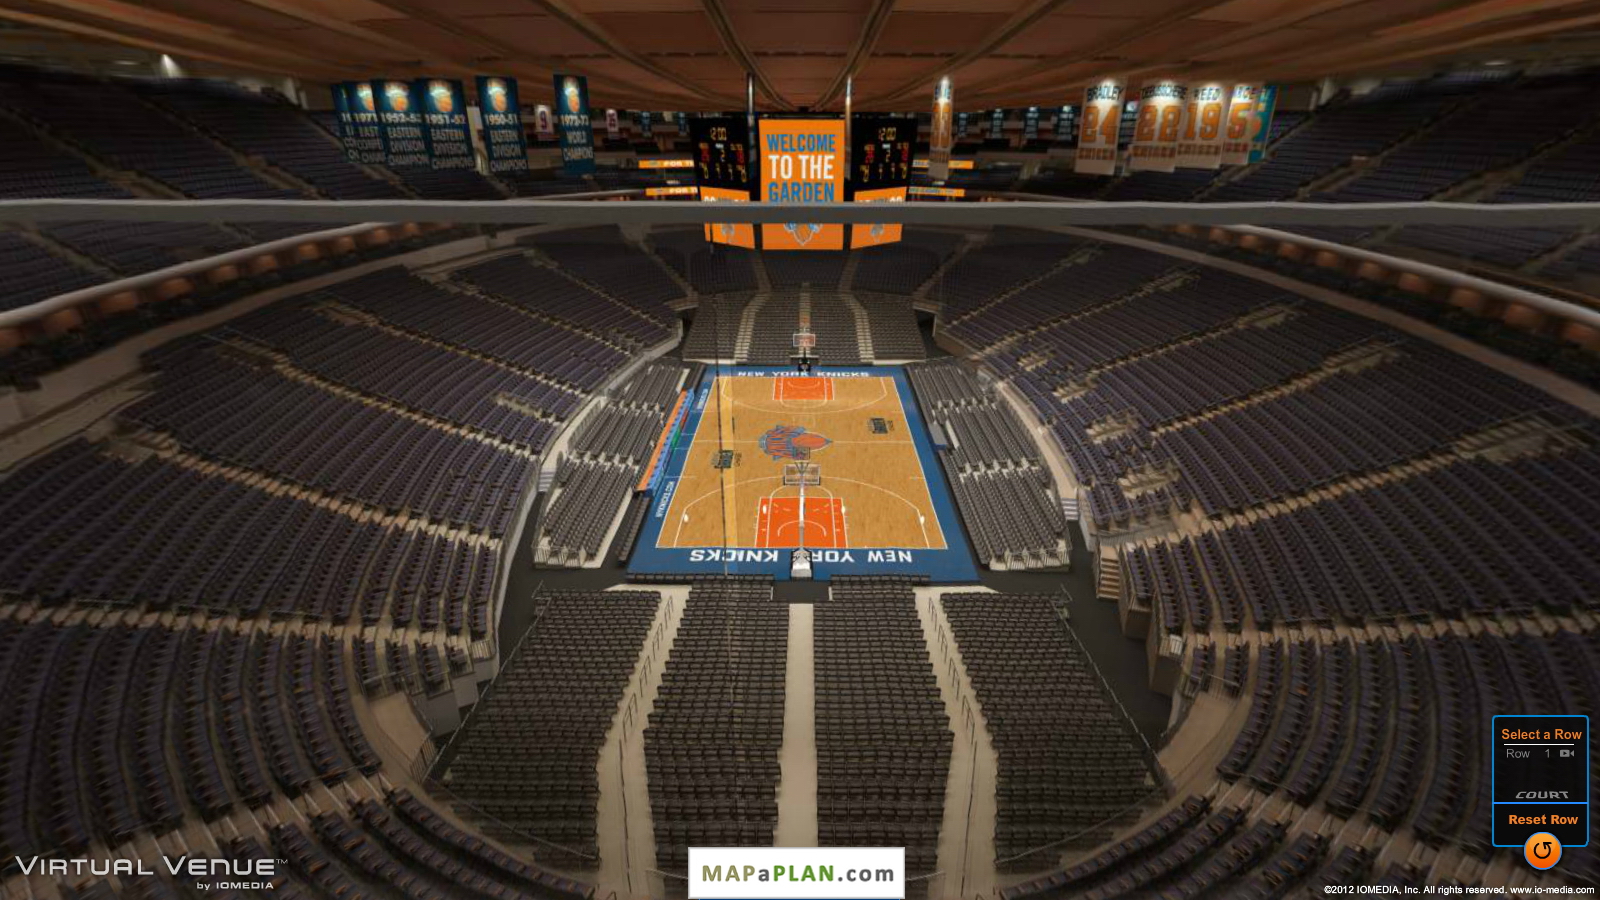 Madison Square Garden Seating Chart West Balcony Section 20 View